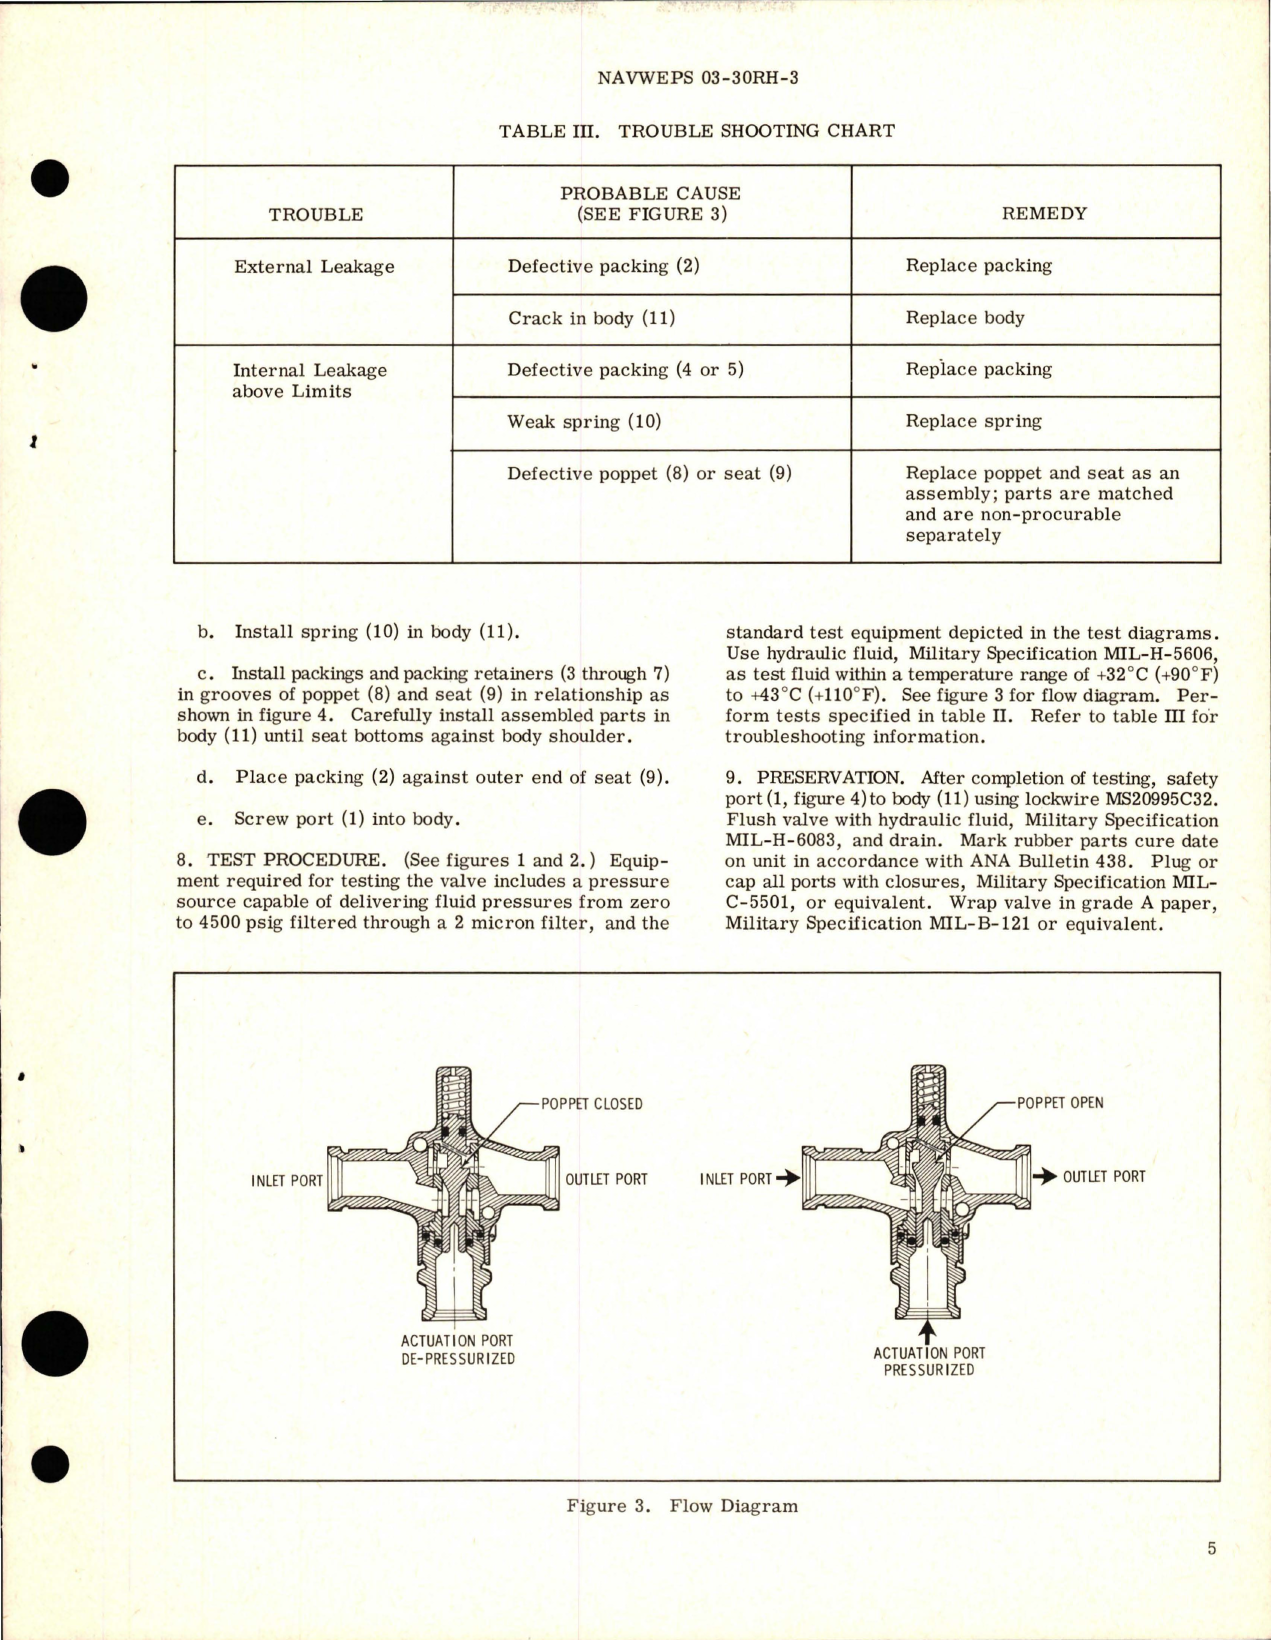 Sample page 5 from AirCorps Library document: Overhaul Instructions with Parts Breakdown for Pressure Operated Shutoff Valve - Part 7-U-7105 